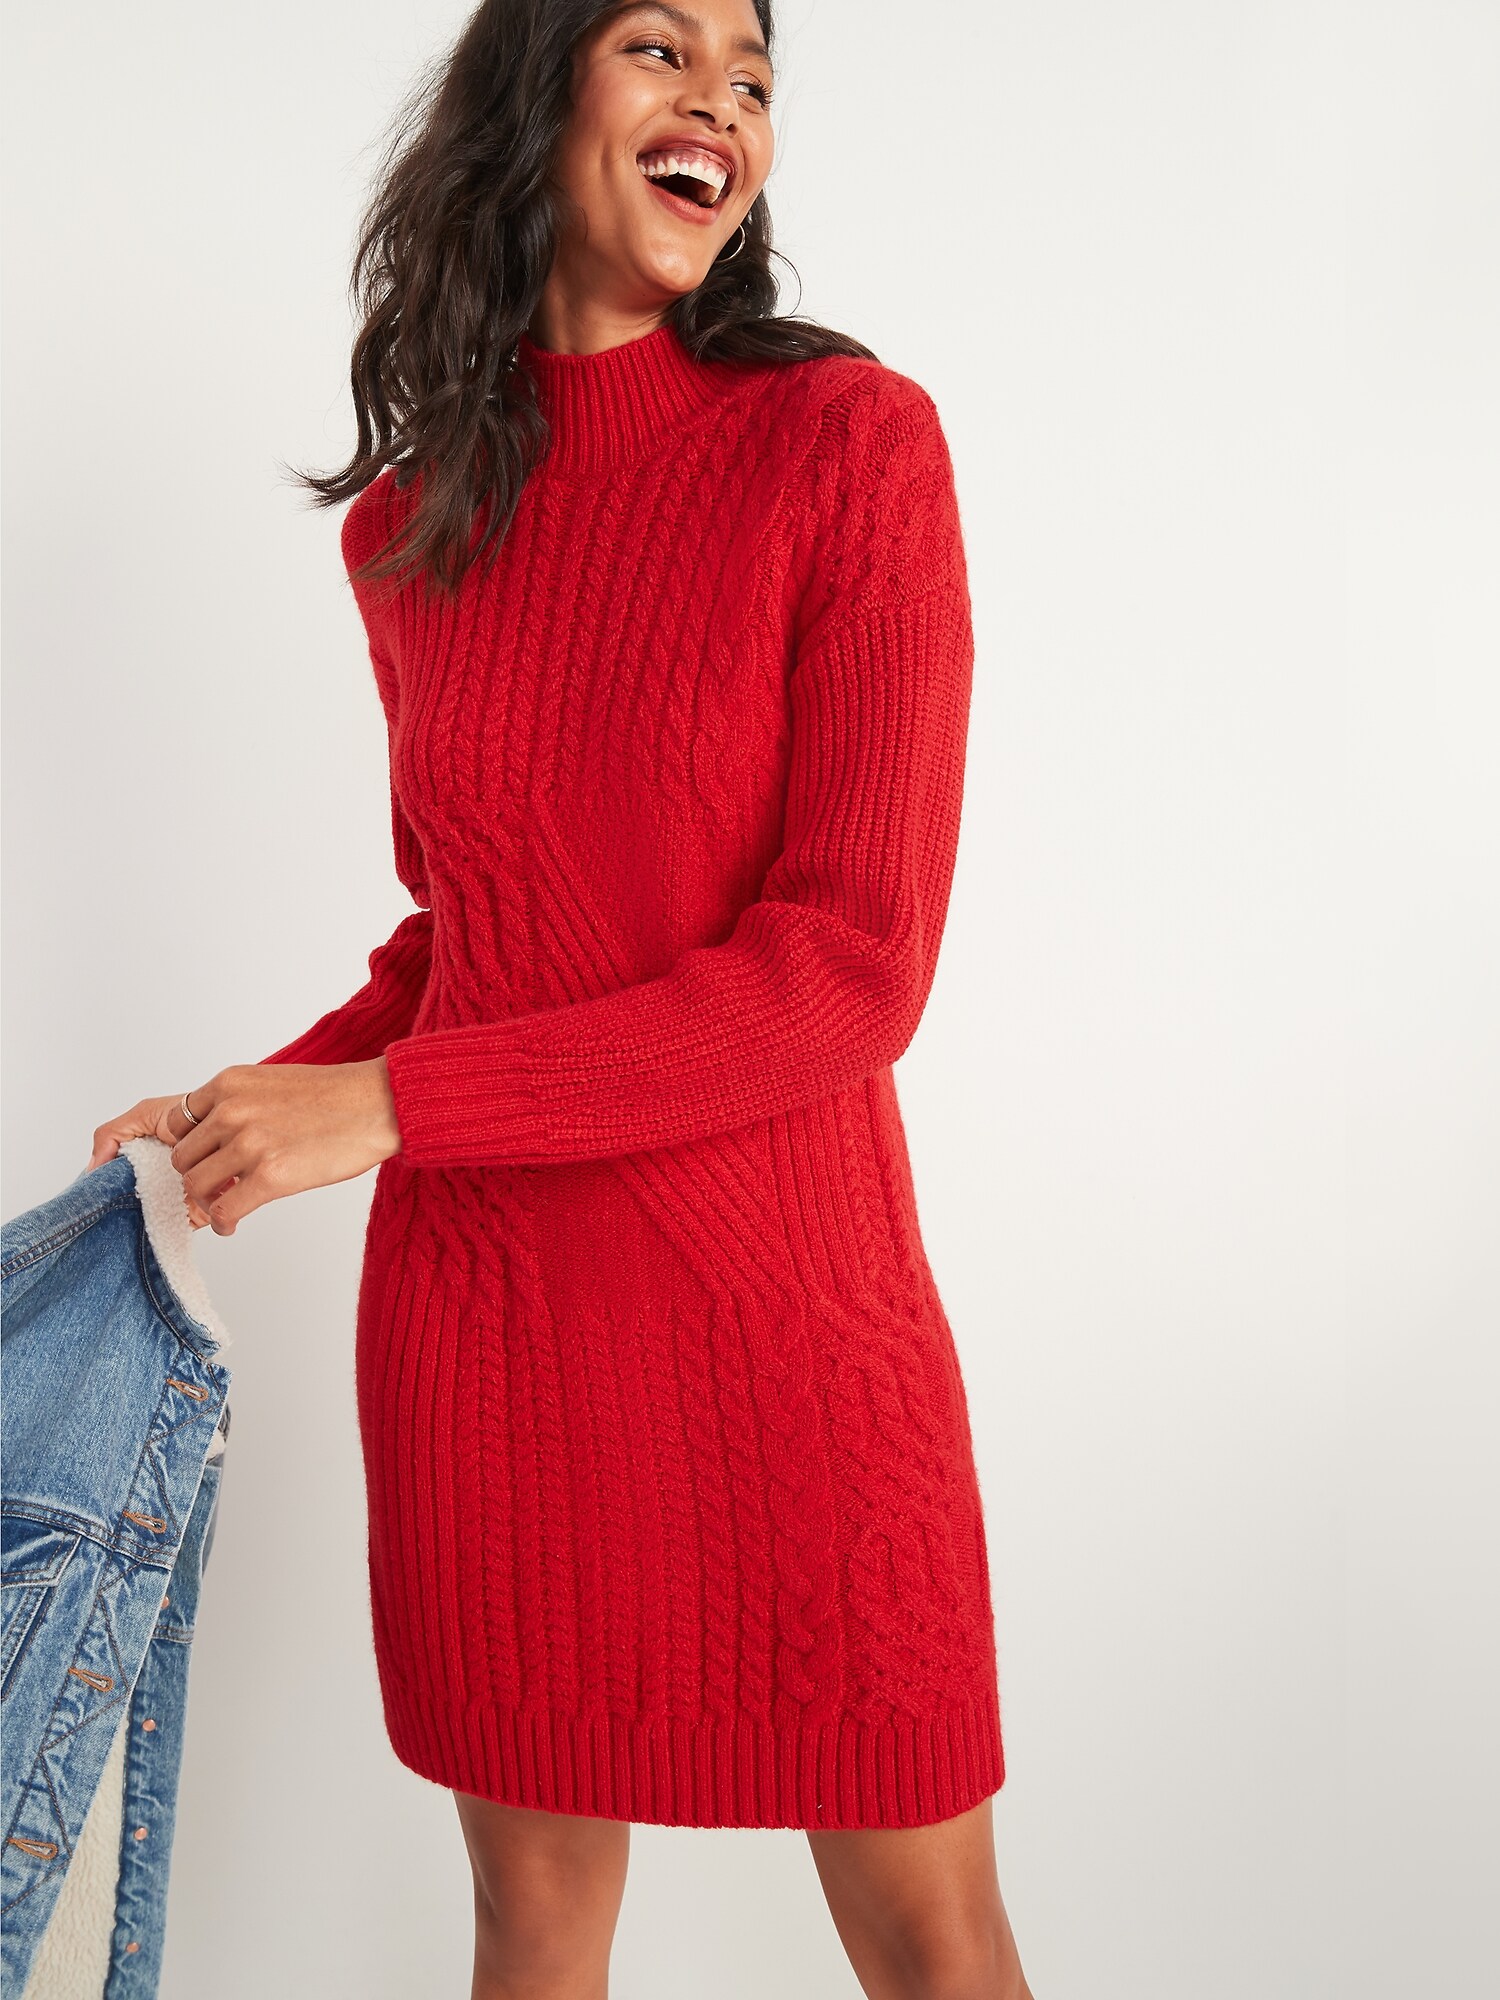 red dress with sweater Big sale - OFF 62%